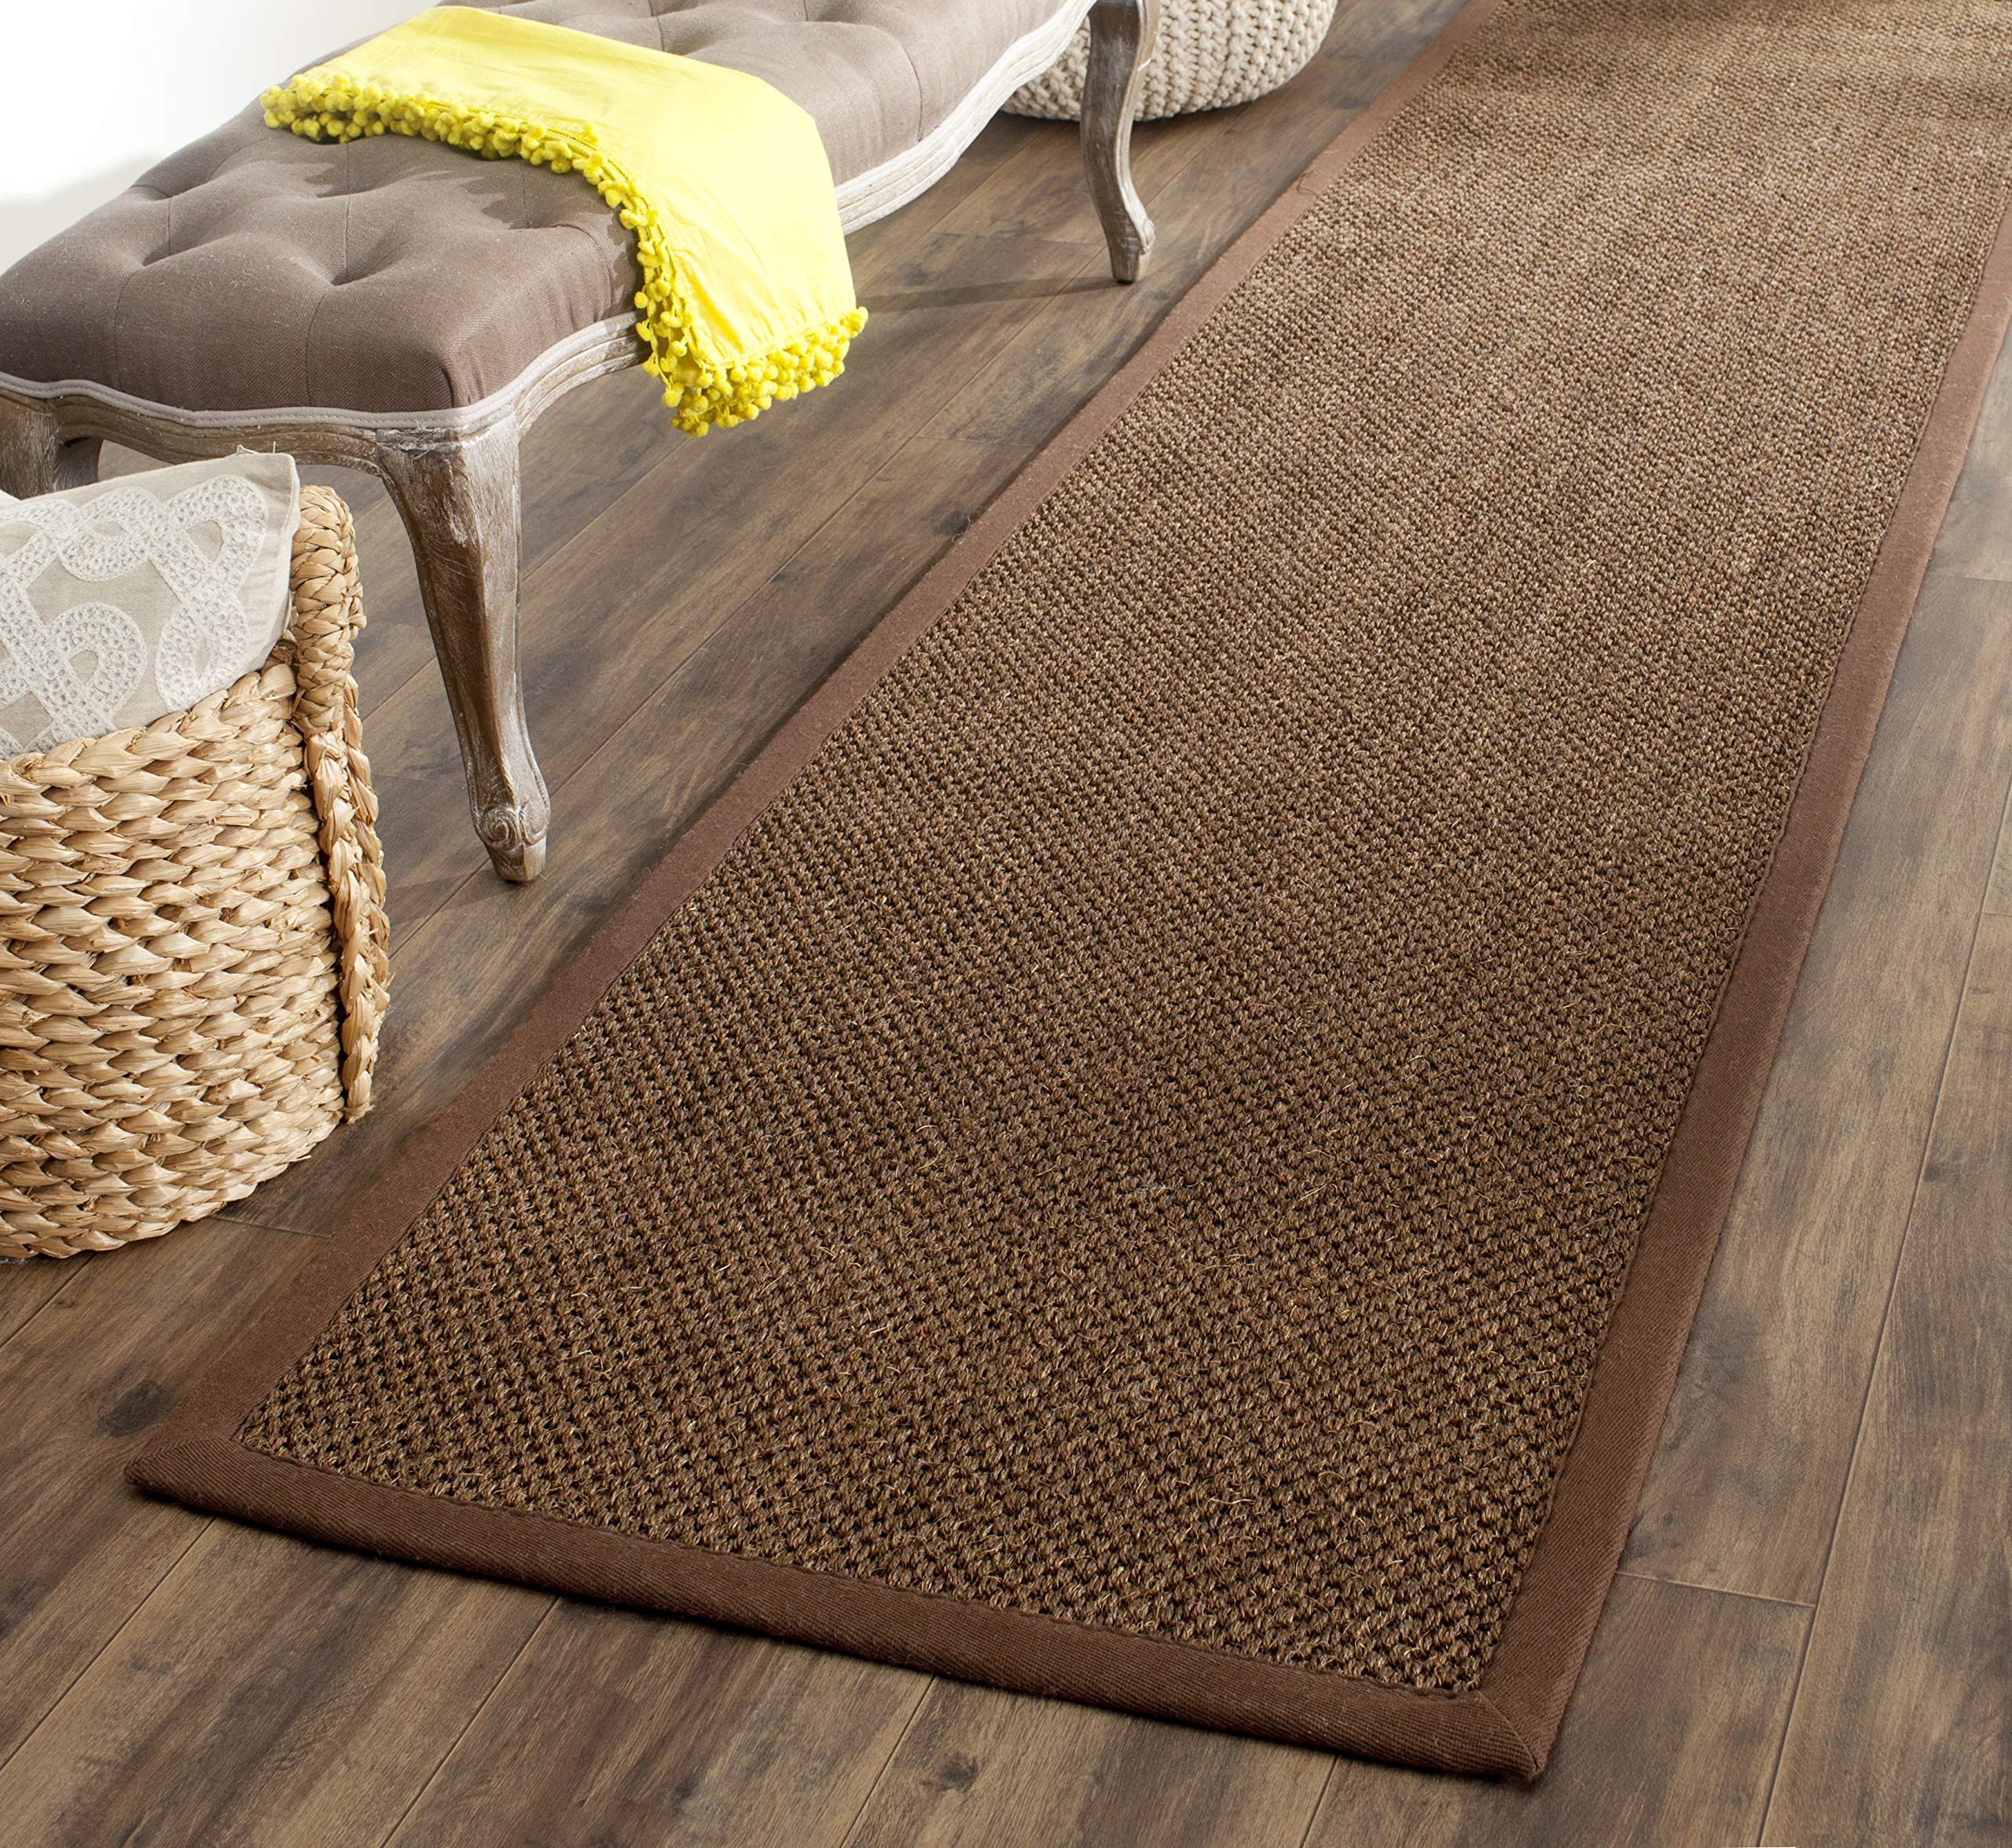 SAFAVIEH Natural Fiber Collection Accent Rug - 2' x 4', Brown & Brown, Border Sisal Design, Easy Care, Ideal for High Traffic Areas in Entryway, Living Room, Bedroom (NF443D)